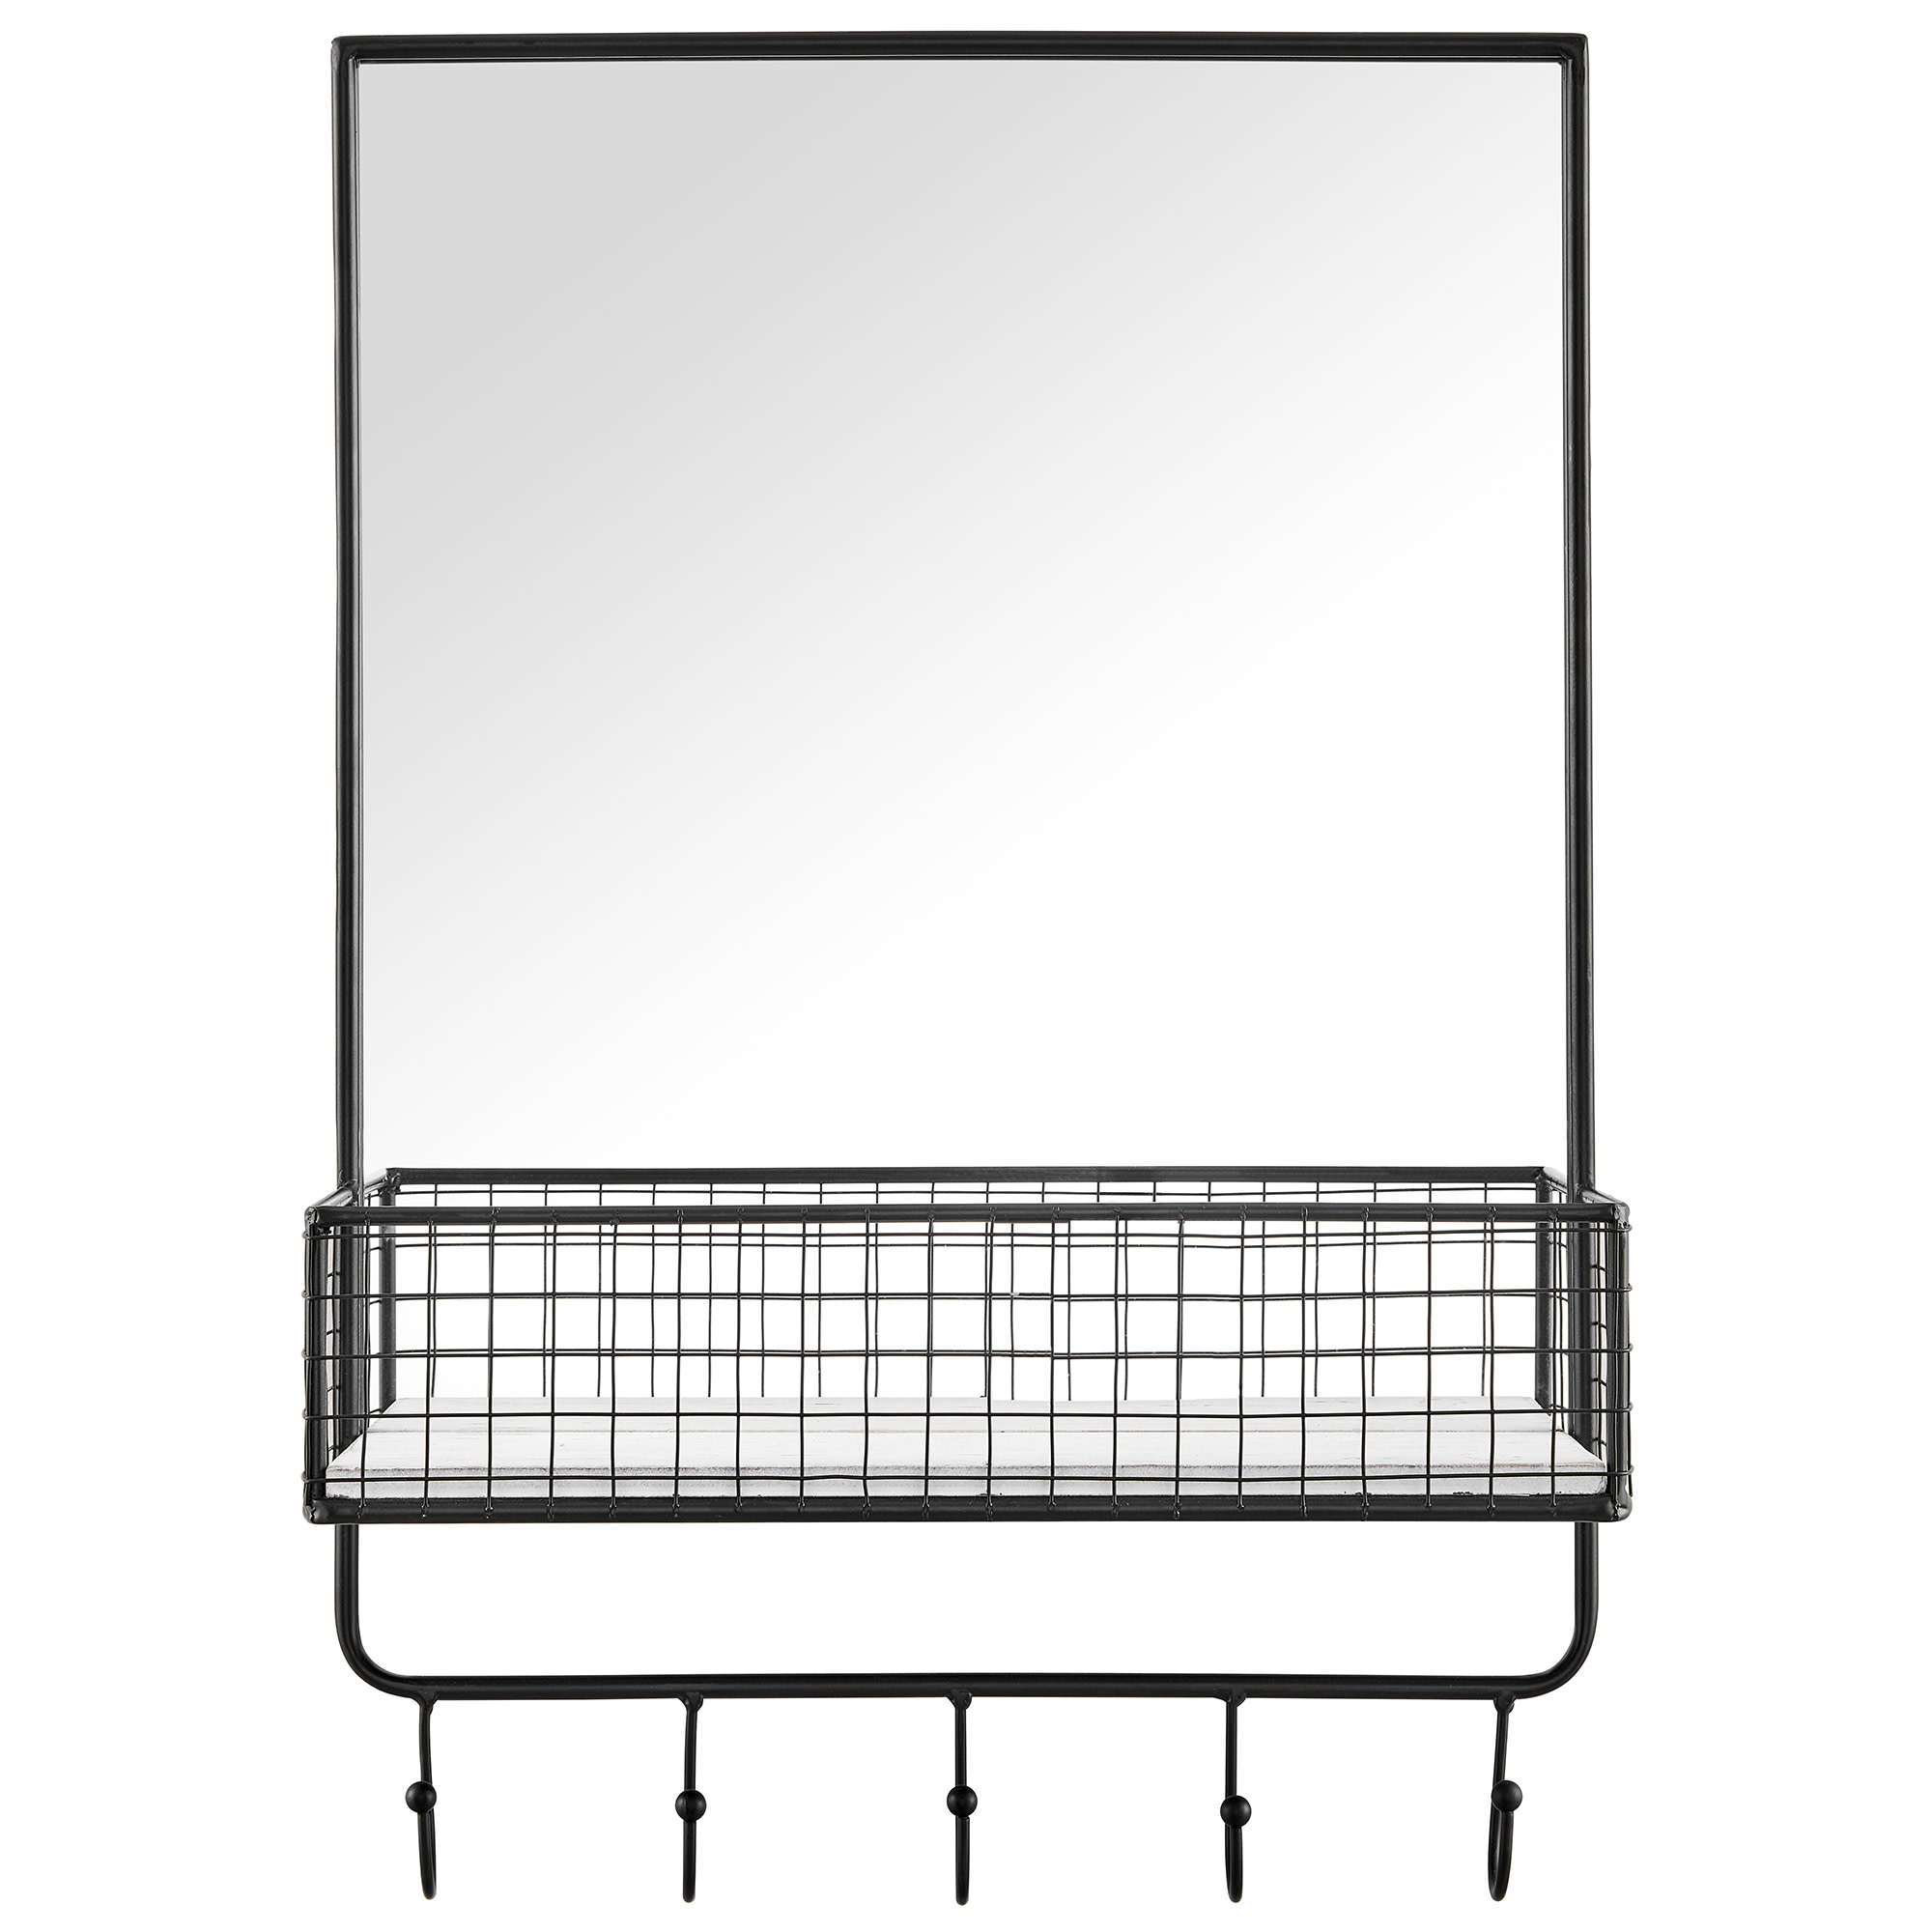 FirsTime & Co. Black Mabel Organizer Wall Mirror With Hooks, Industrial, Rectangular, 16.5 x 5 x 24.5 in - image 3 of 5